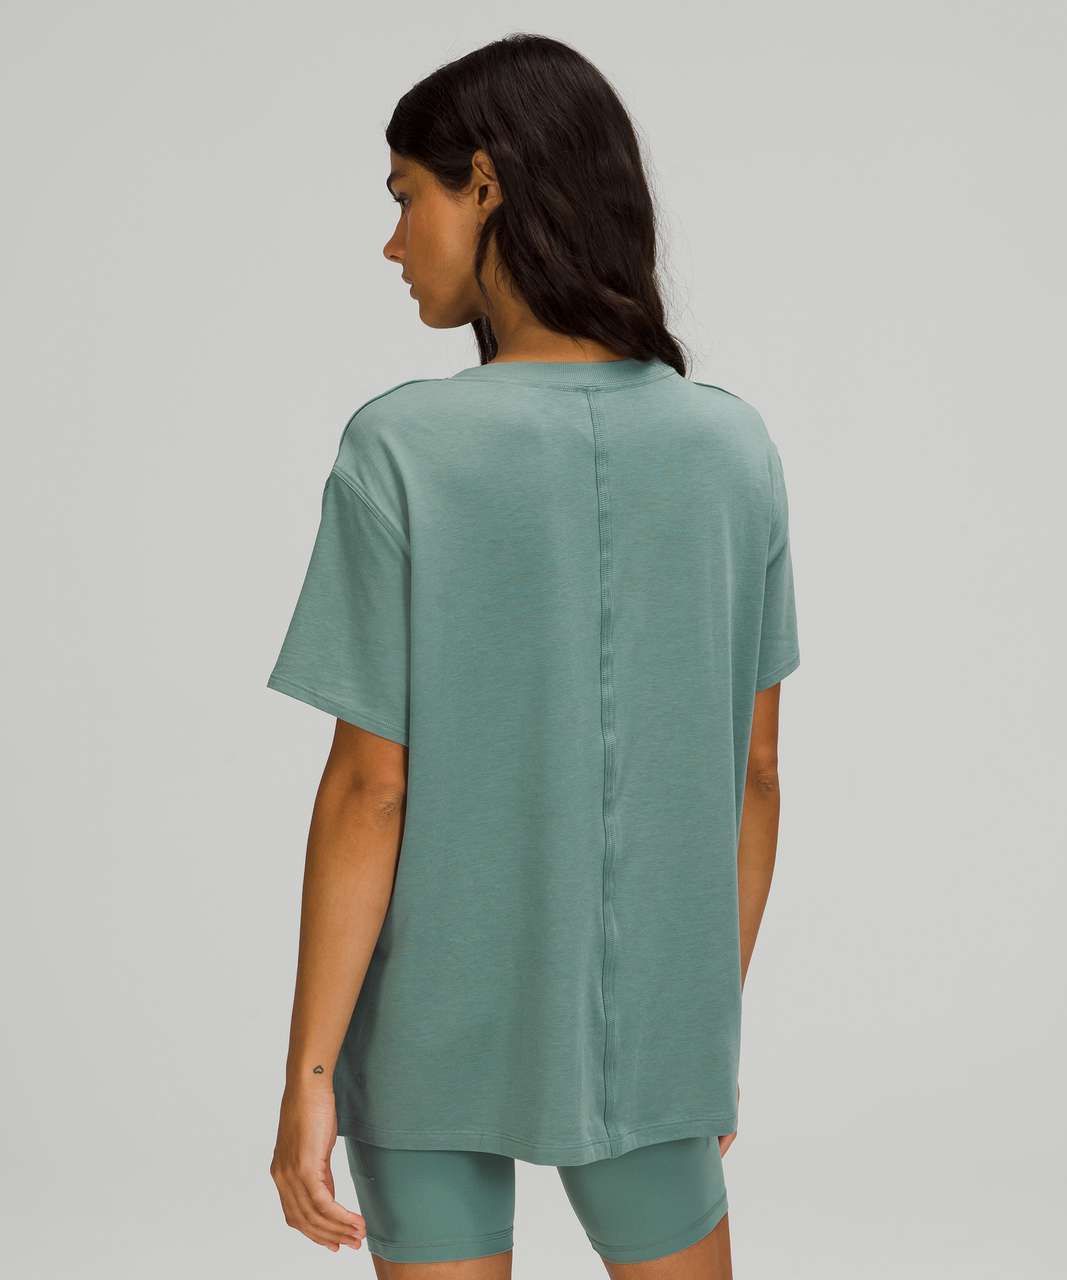 Lululemon All Yours Tee - Tidewater Teal